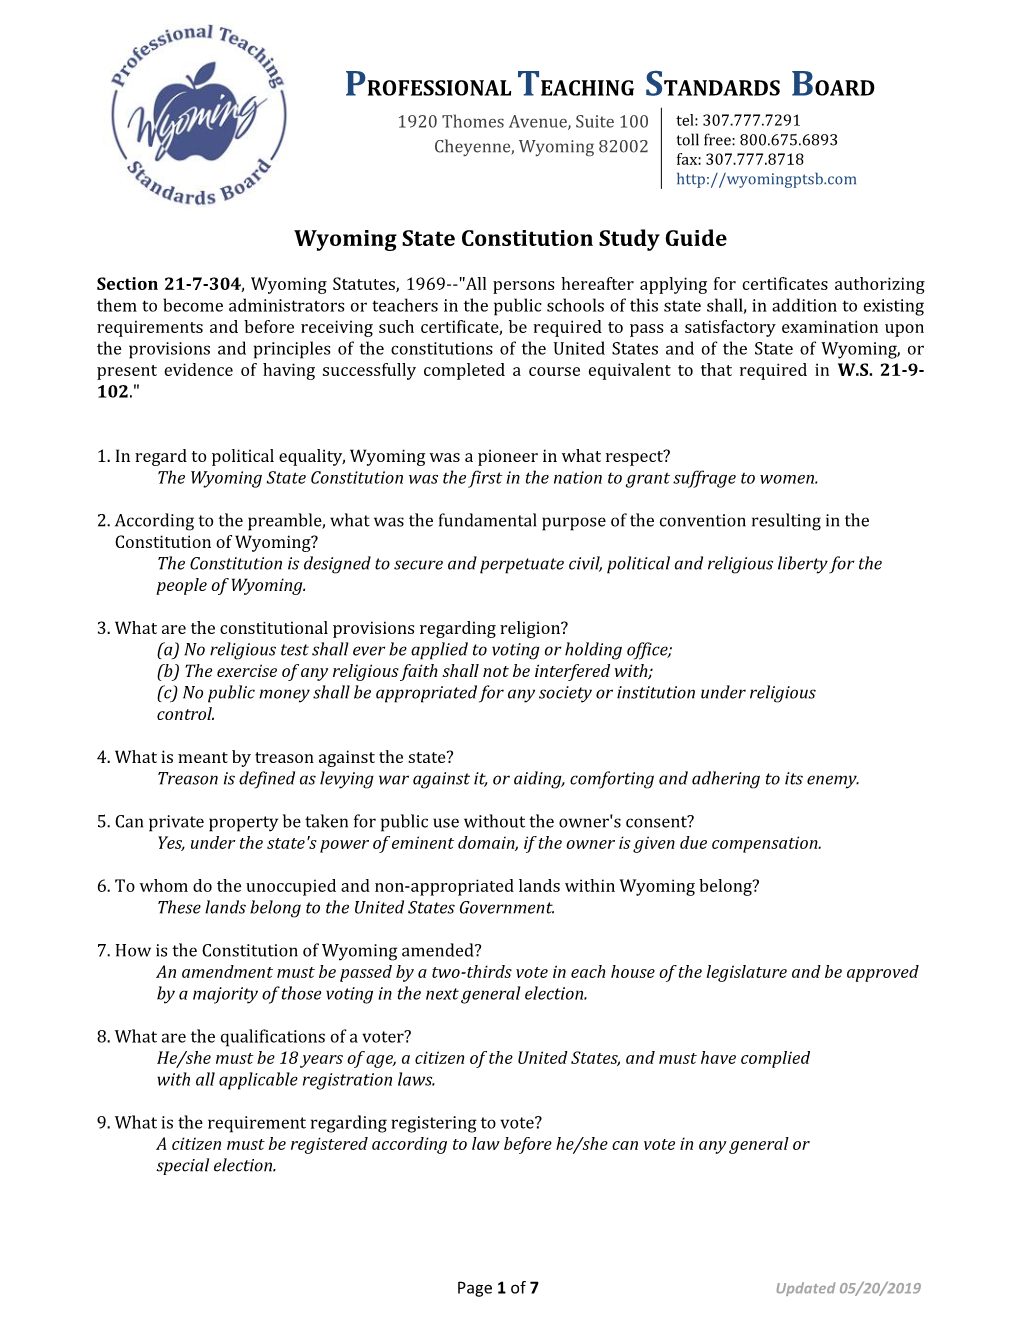 WY Constitution Study Guide